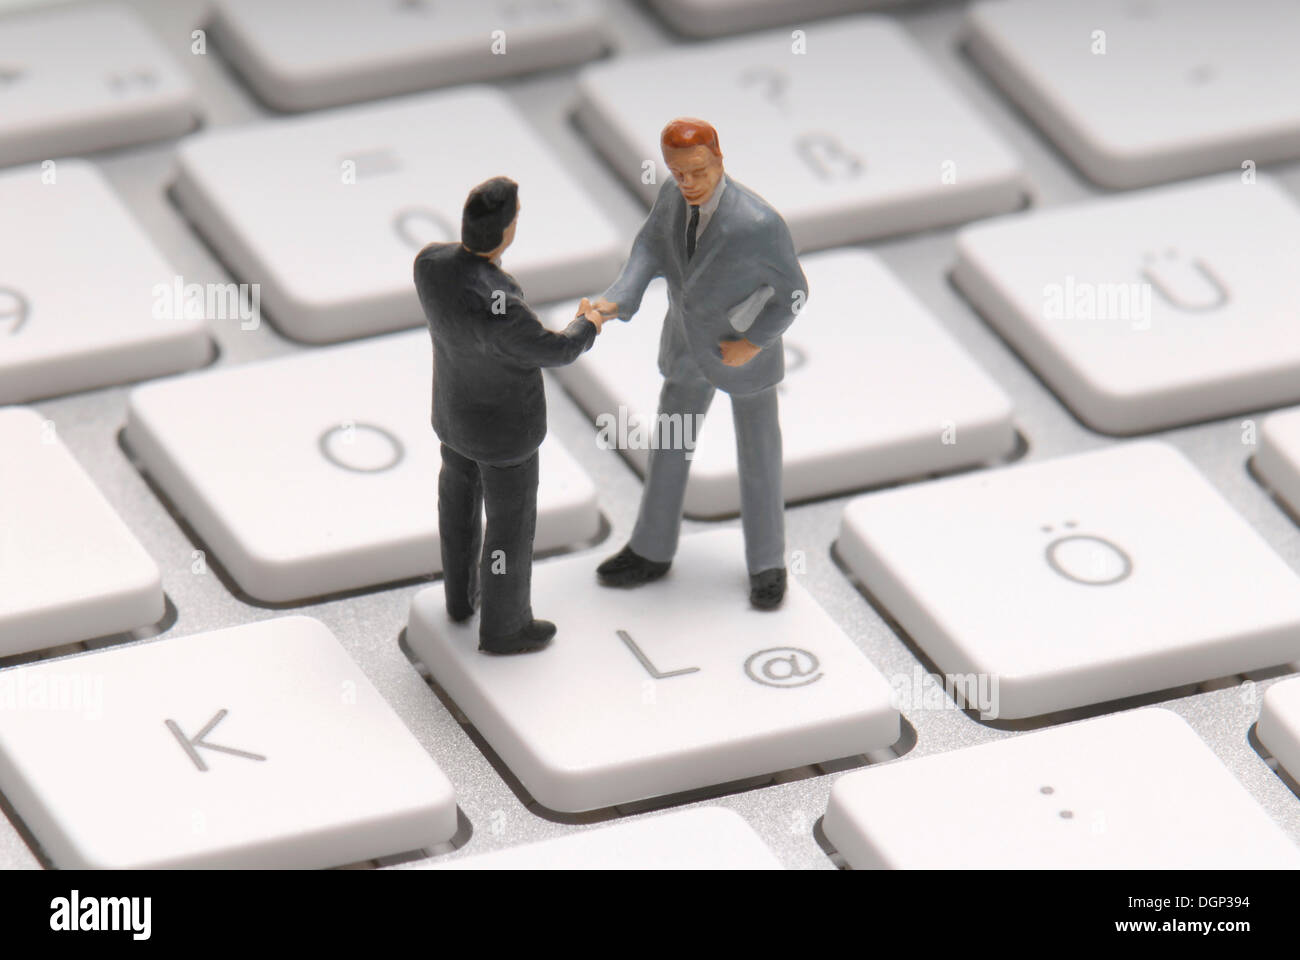 Two business men, figurines, shaking hands on the at-key, symbolic image for trading on the Internet Stock Photo